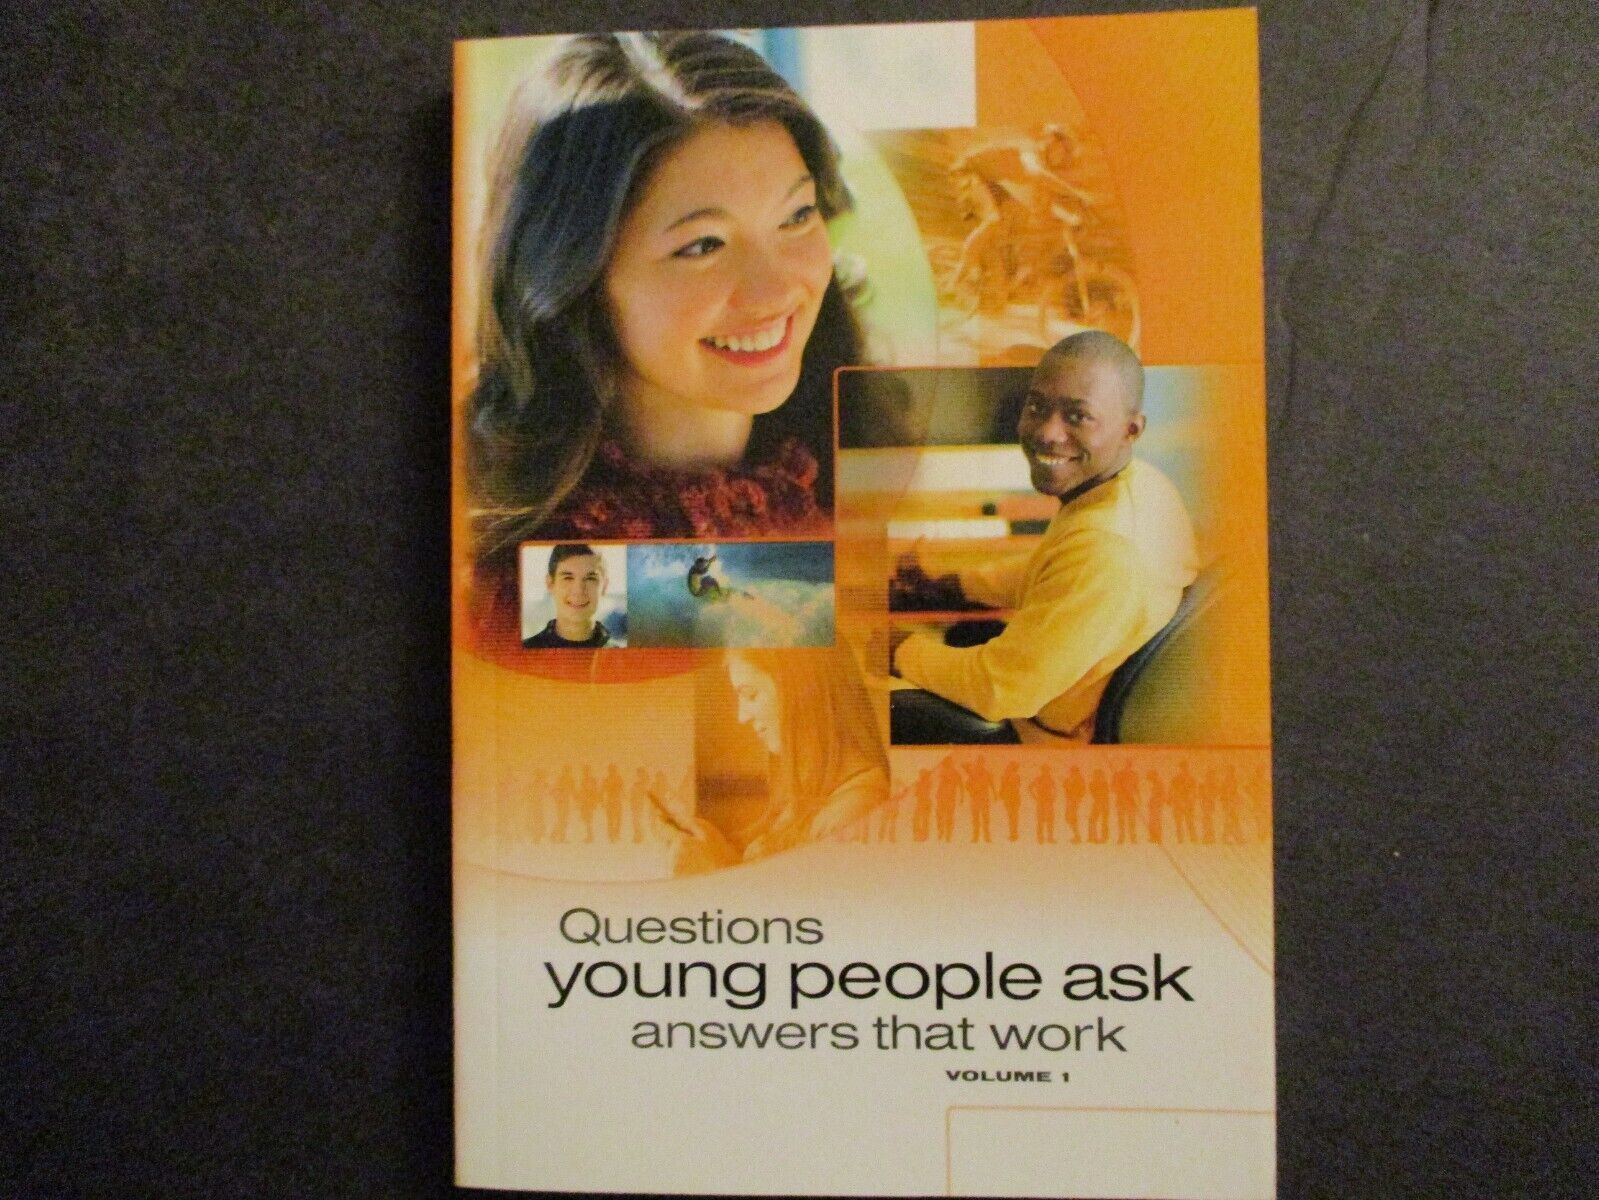 1989, 2011 Questions young people ask answers that work Volume 1 Christian book